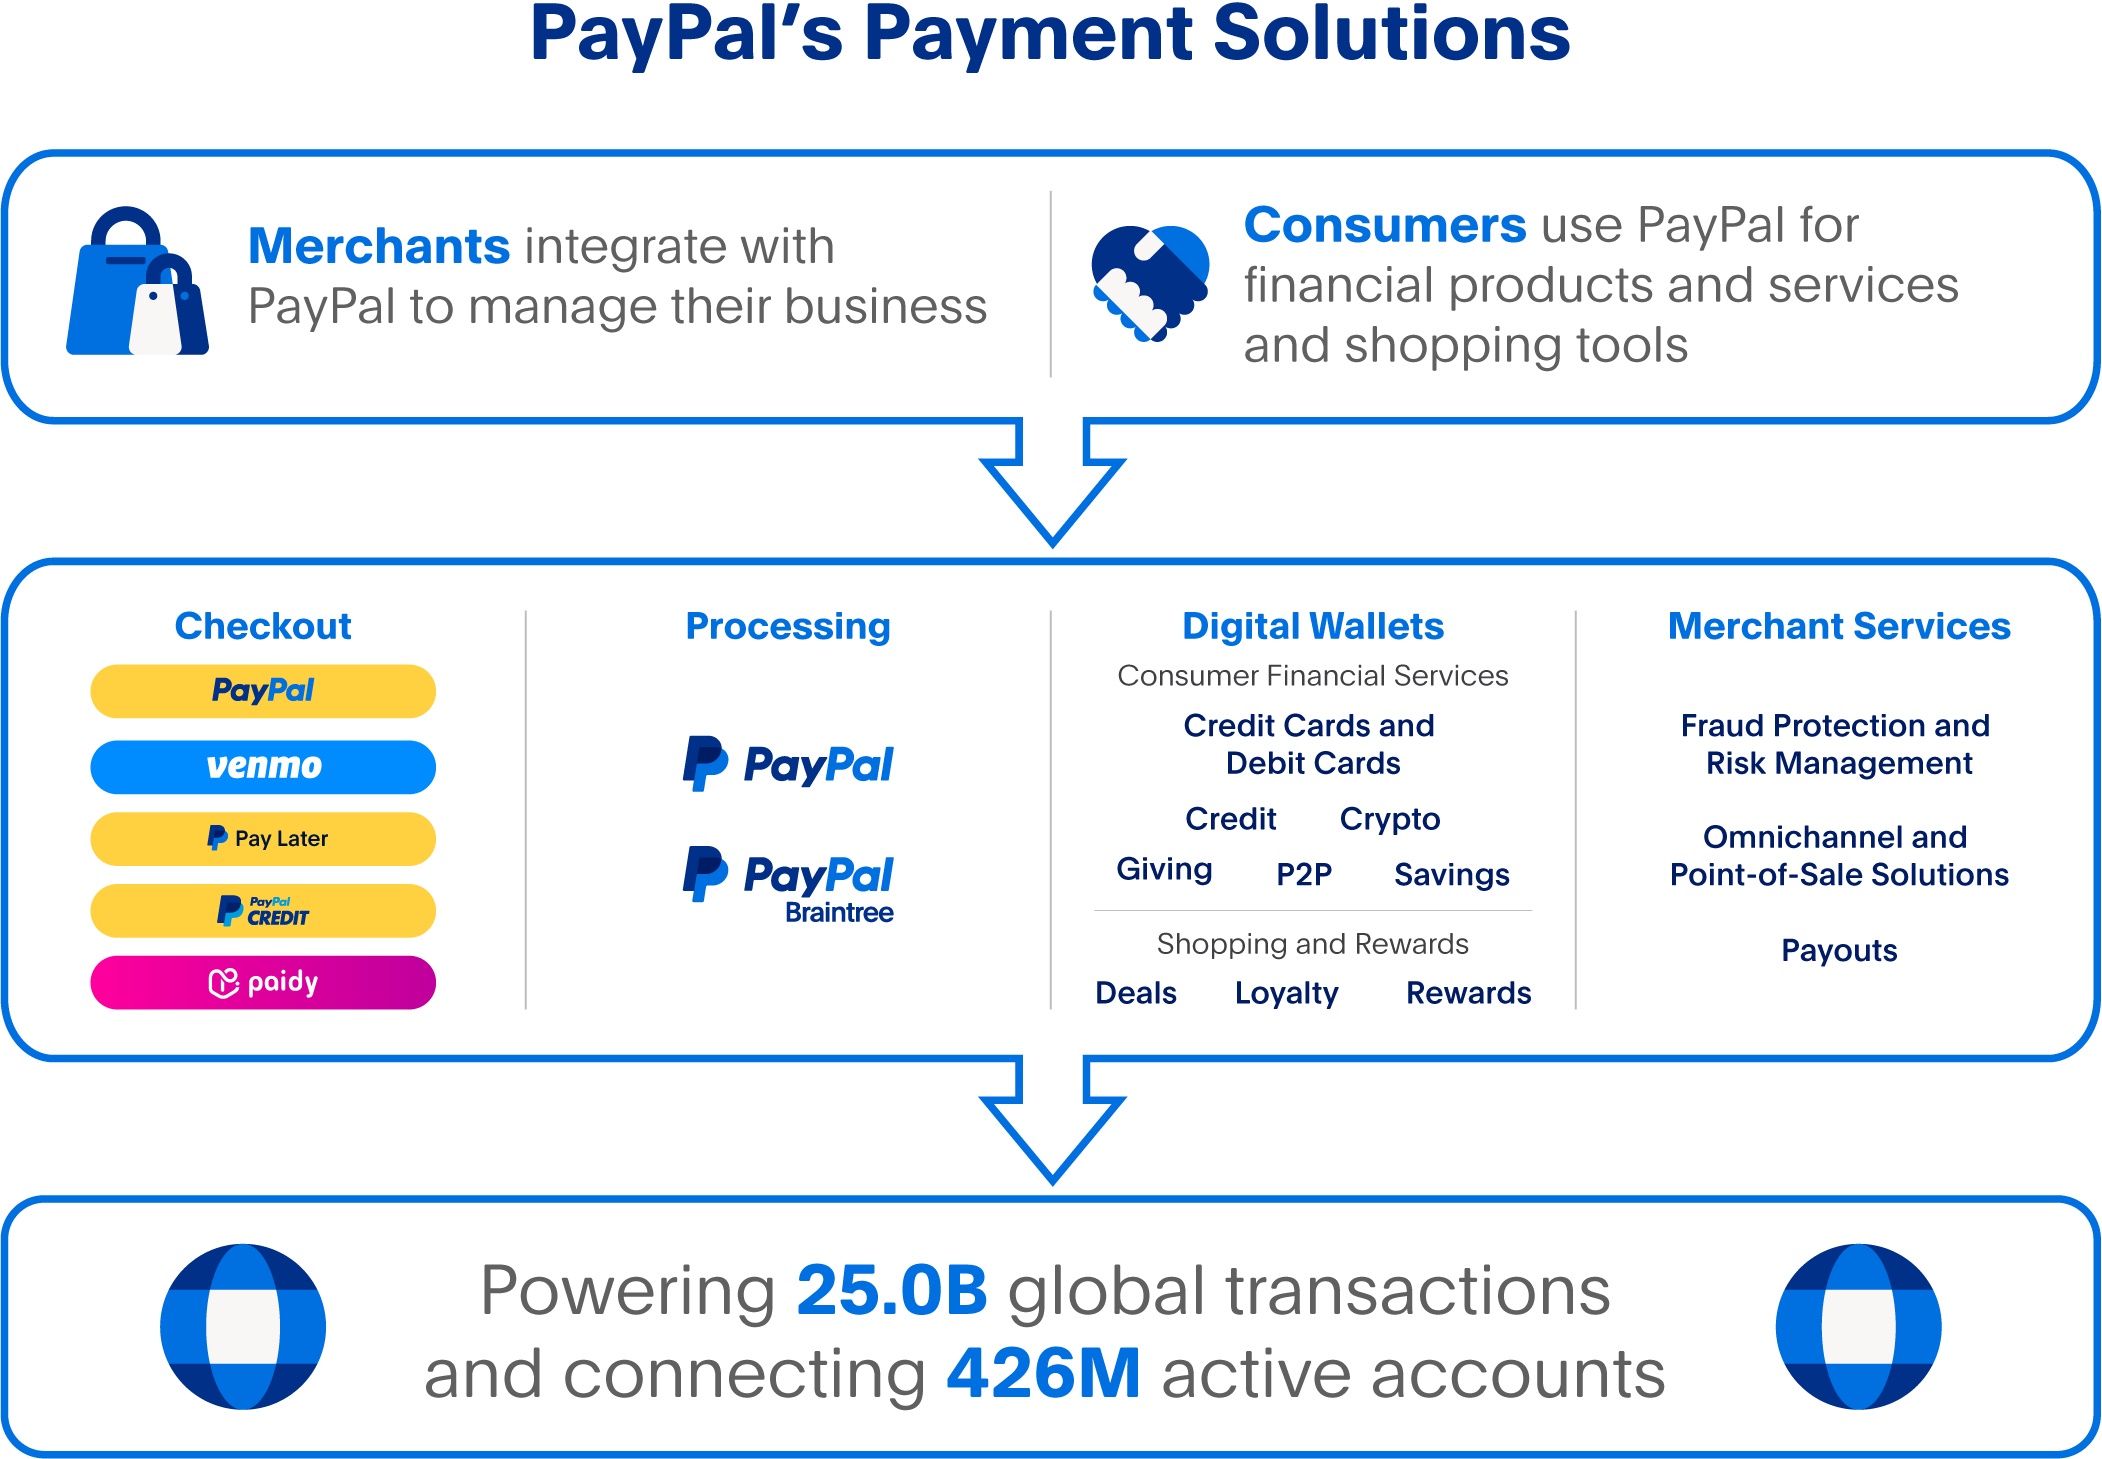 PayPal-2023 10K Graphic-Payment Solutions-Version-R3.jpg